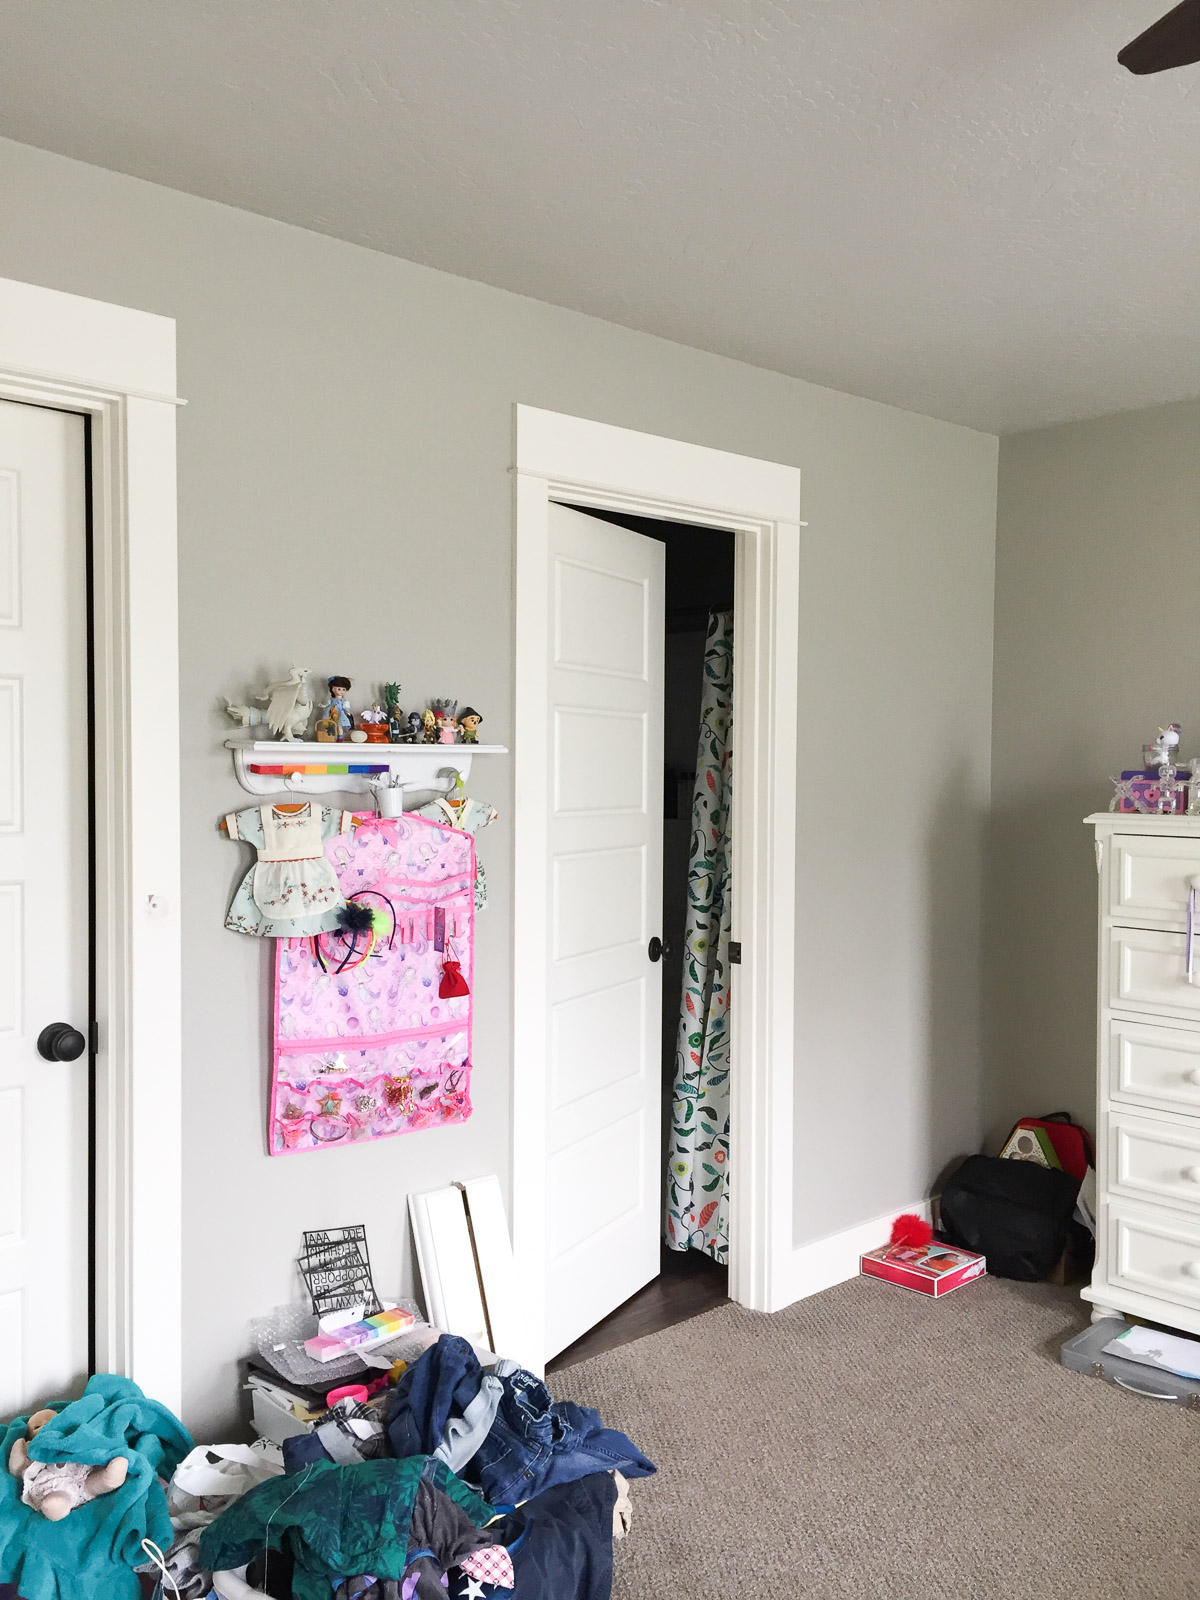 I'm making over our daughter's bedroom for the Spring 2019 One Room Challenge! The room needs a good clean out, some smart storage, and thoughtful, cohesive design.